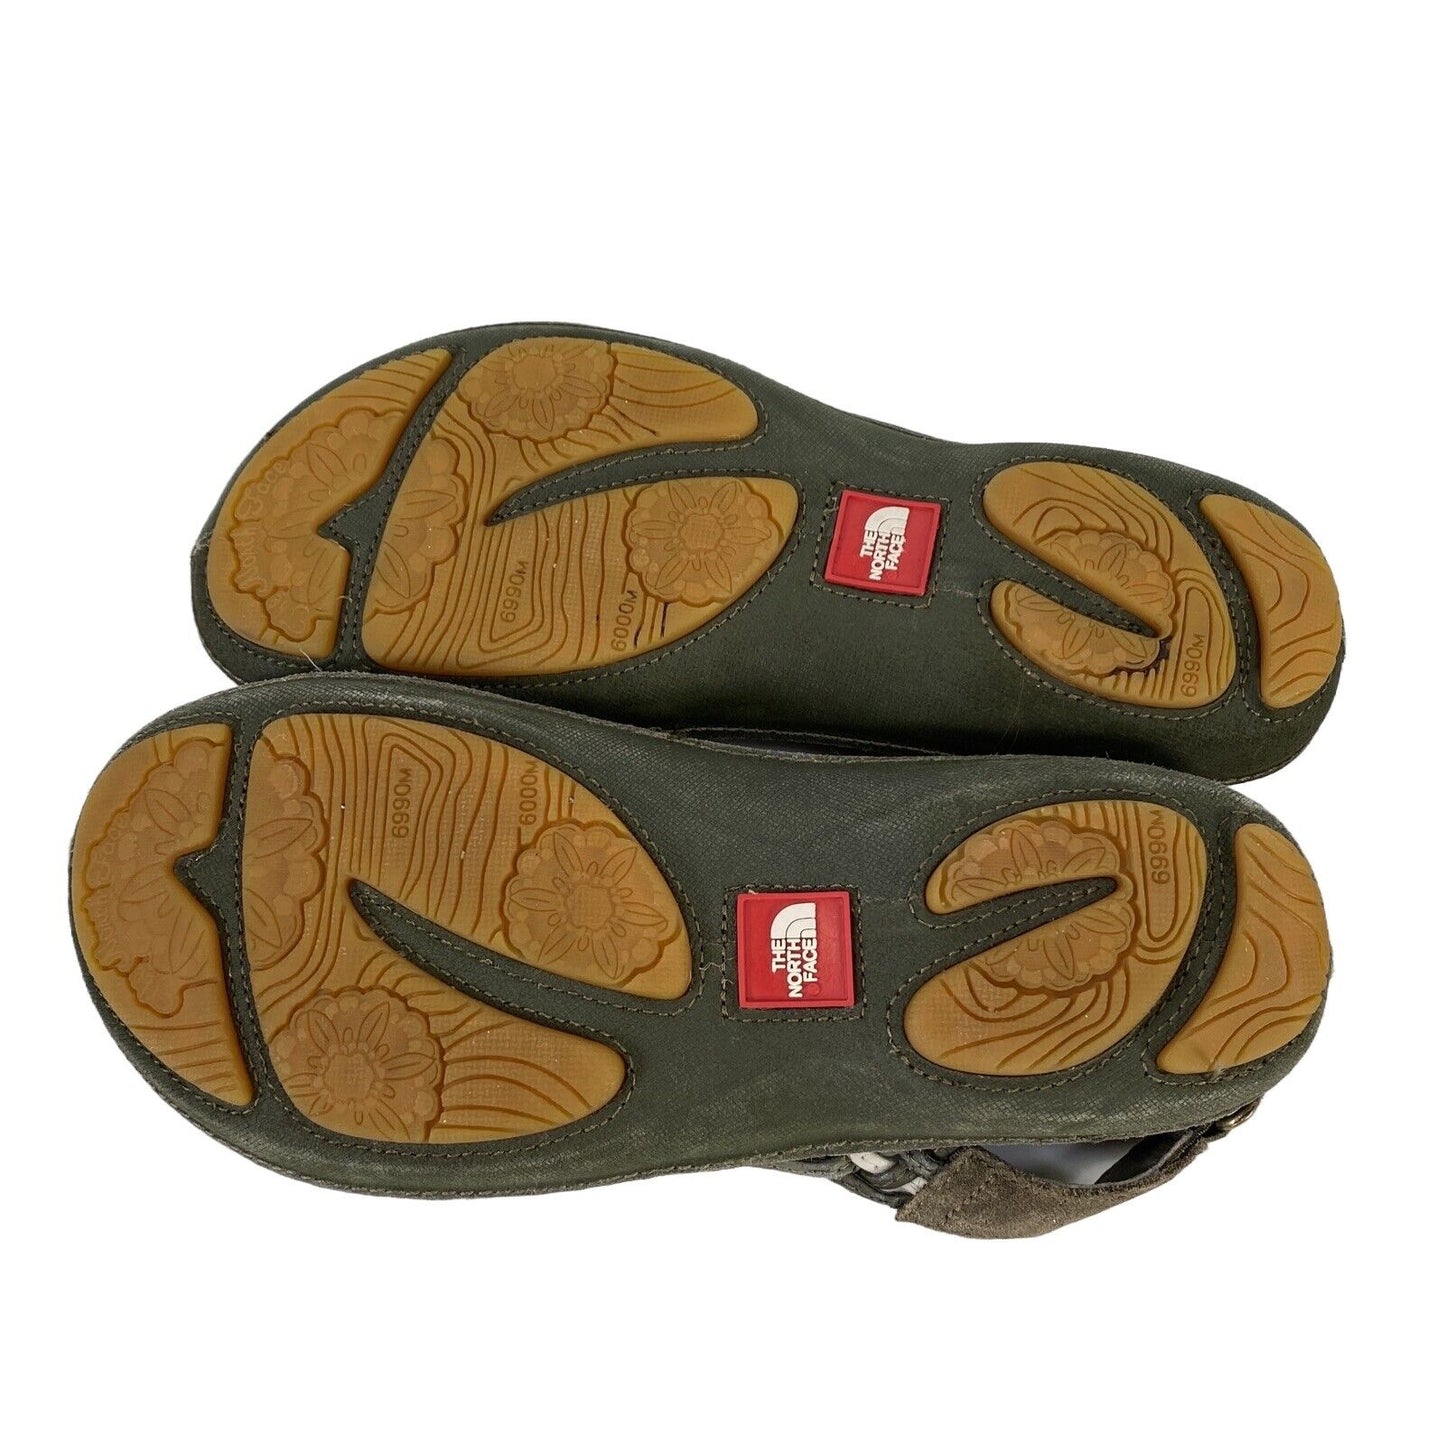 The North Face Women's Green Suede Slingback Sport Hiking Sandals - 8